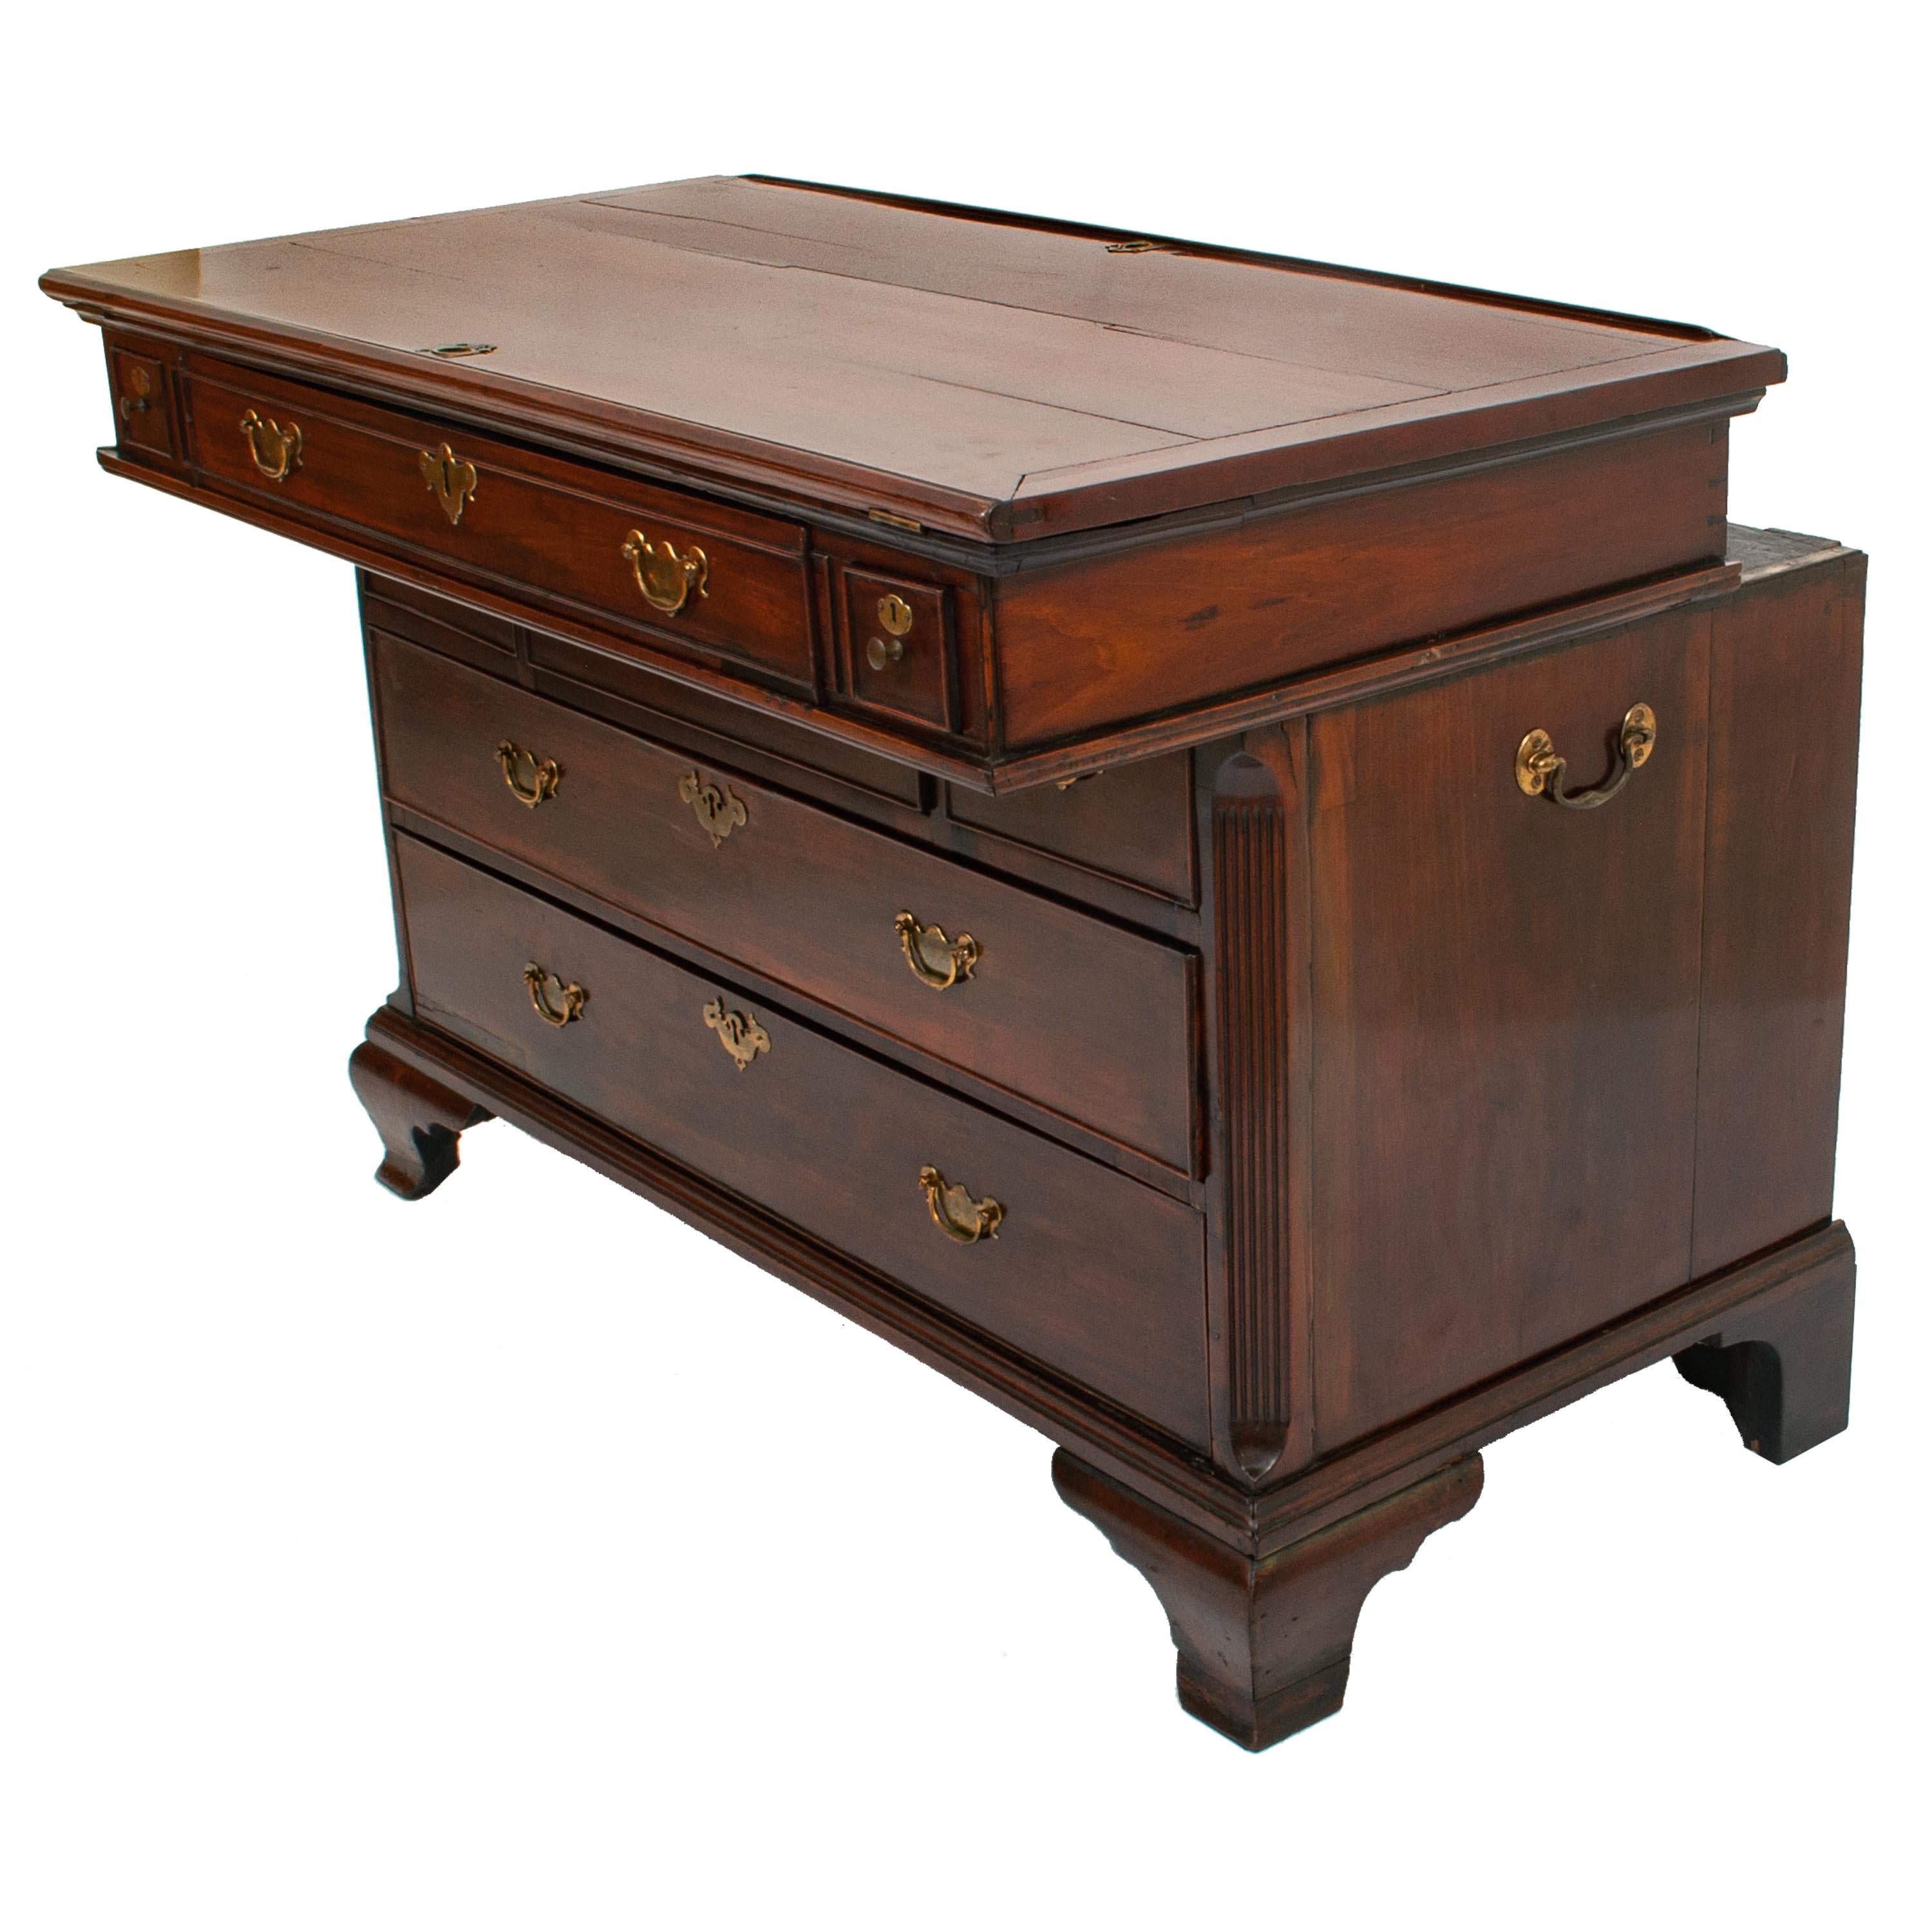 18th Century Antique Mahogany Georgian Architect's Drafting Drawing Desk Table Chest 1780 For Sale